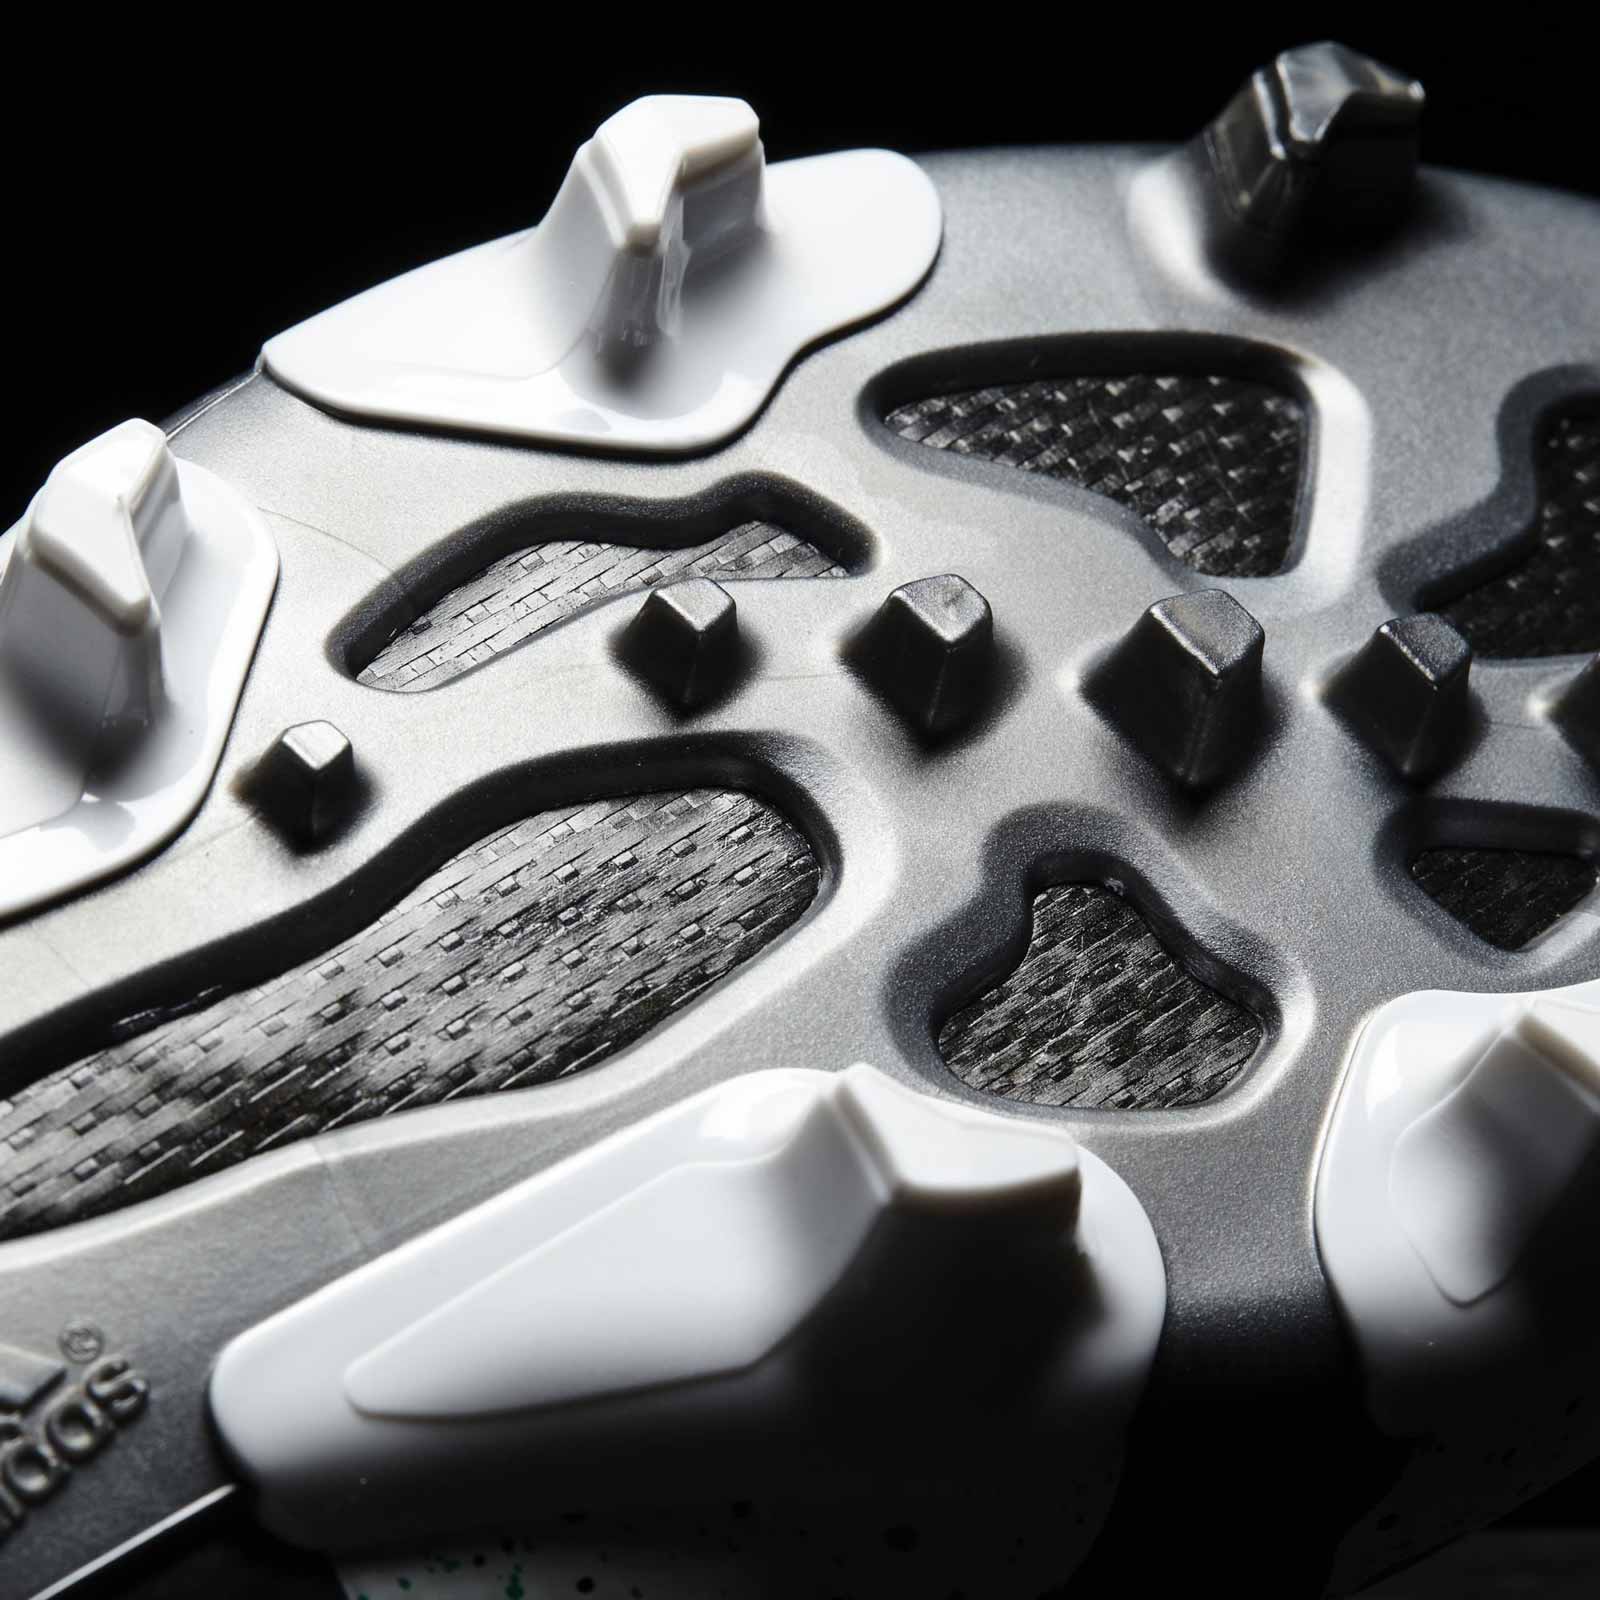 Black / White / Mint Adidas X 2015-2016 Boots Released - Footy Headlines